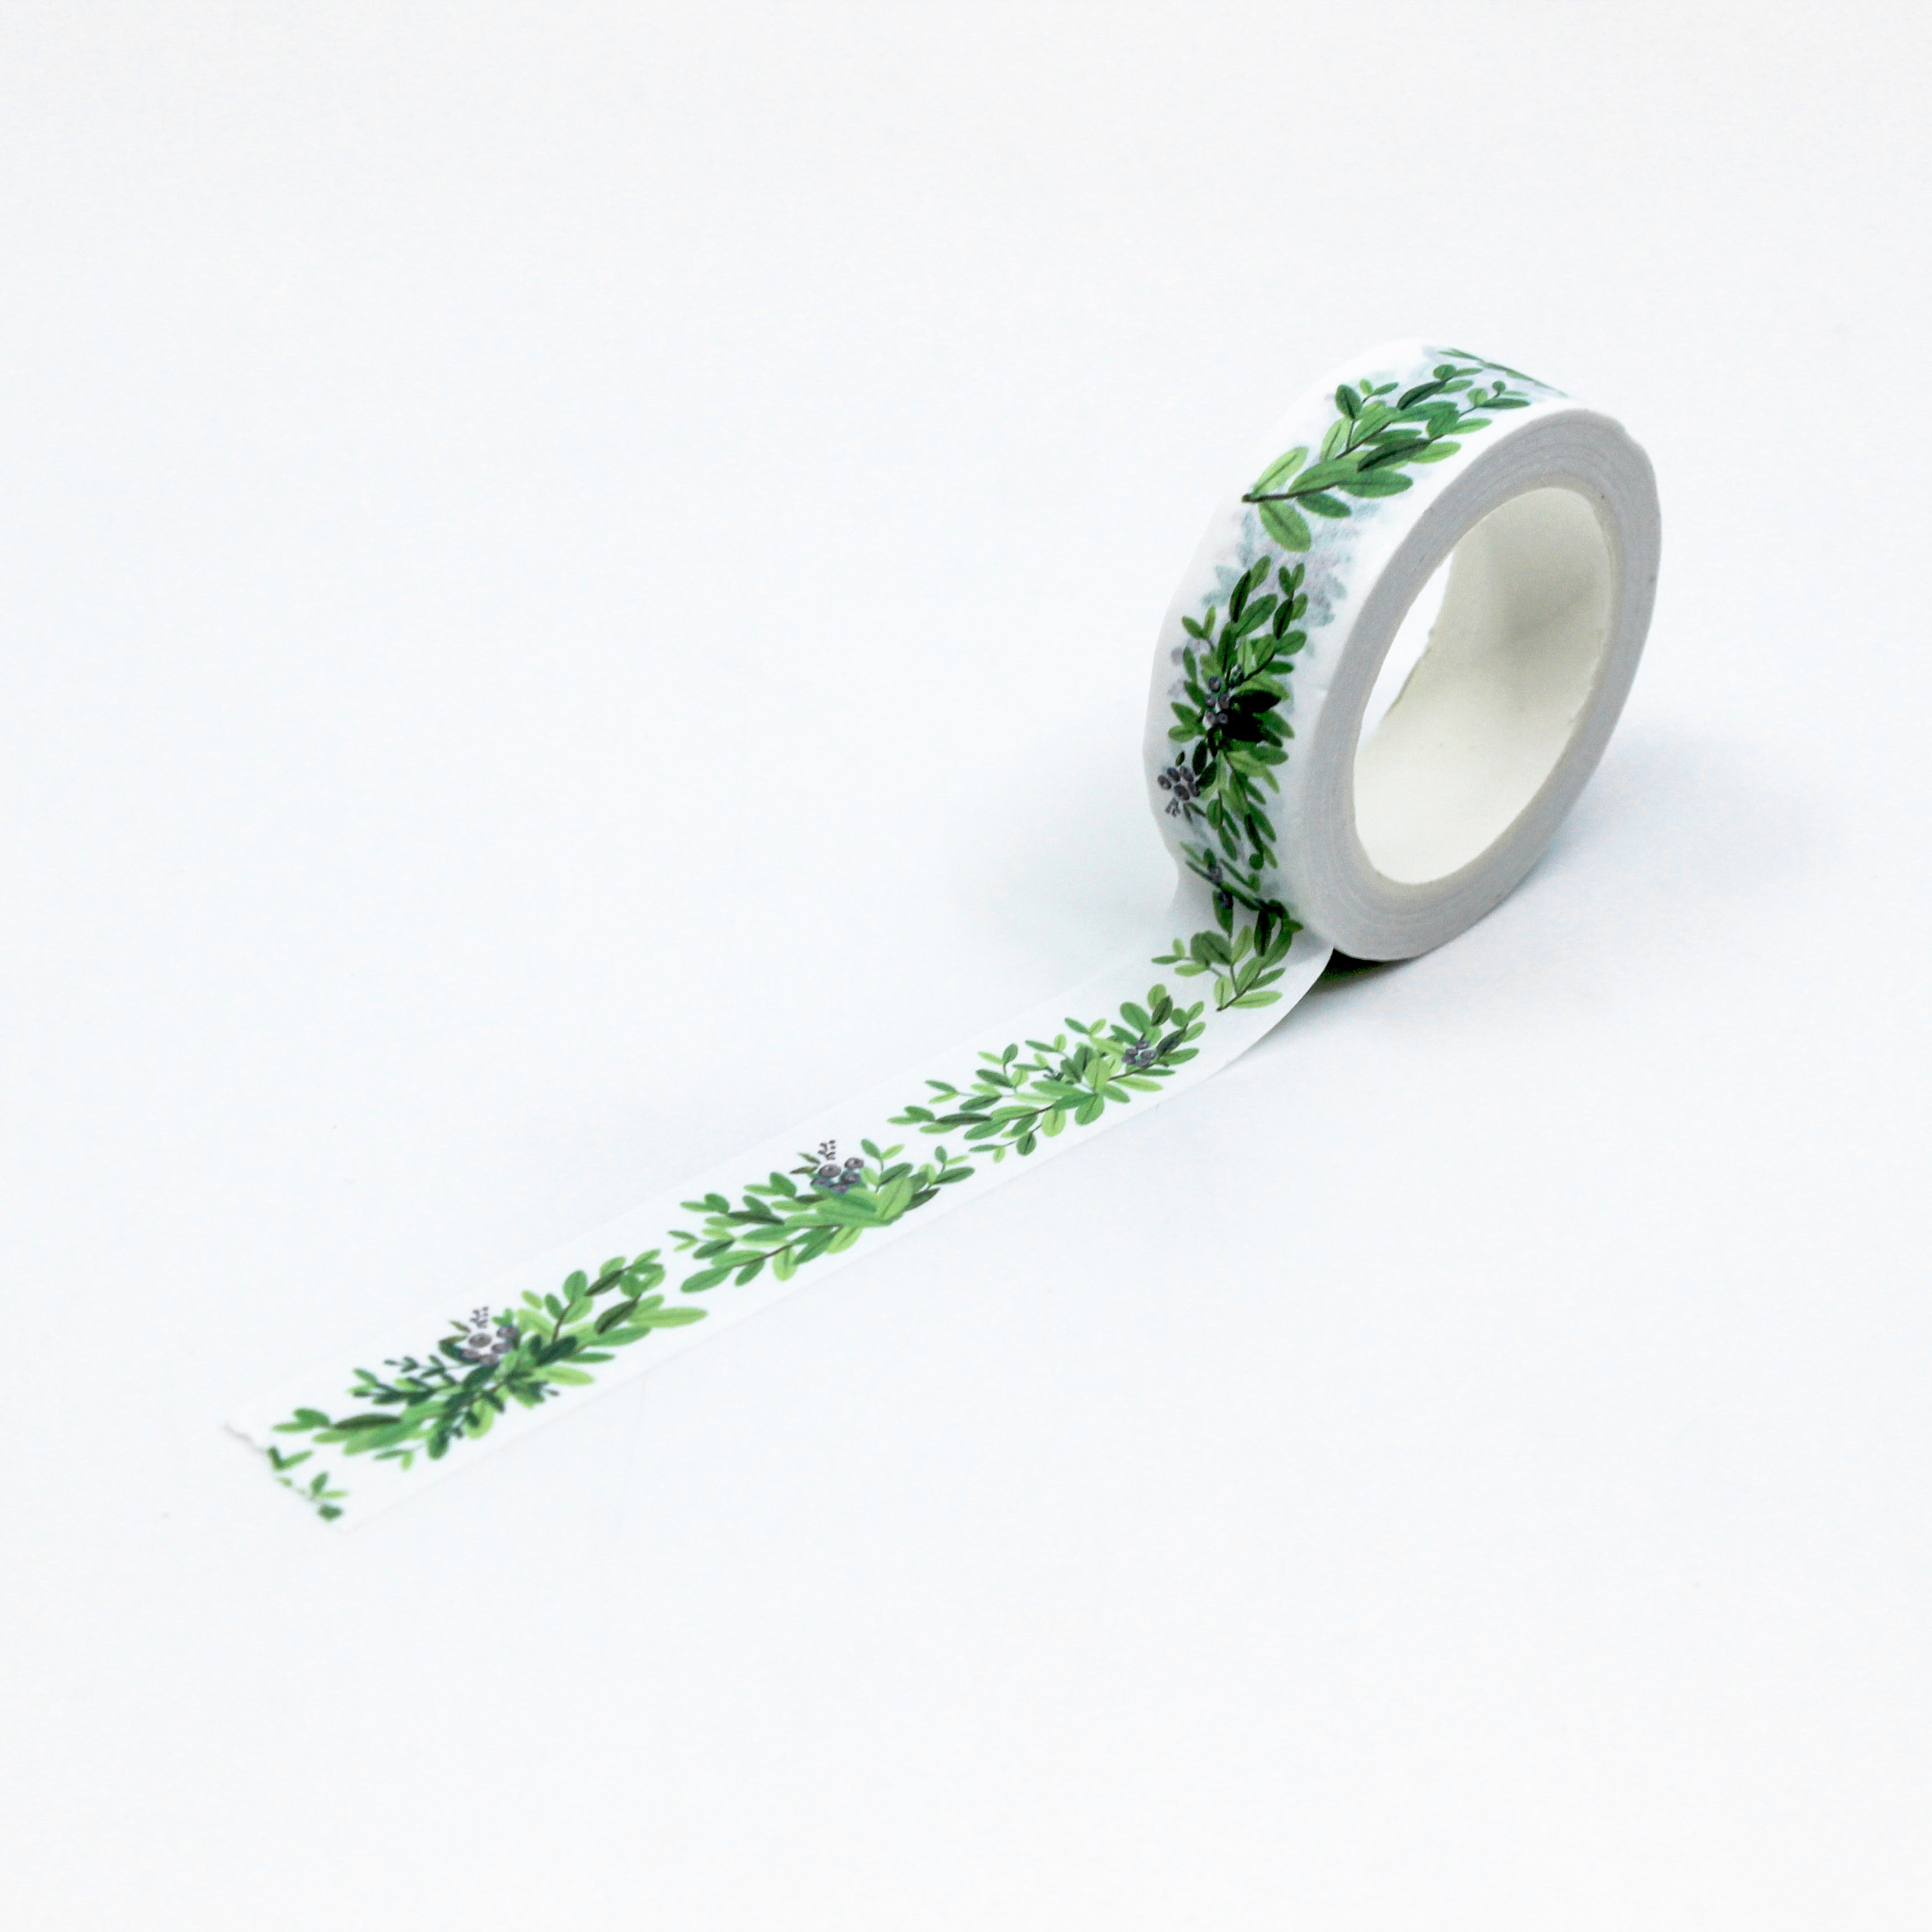 This a full pattern repeat view of greenery berry branch collections washi tape from BBB Supplies Craft Shop